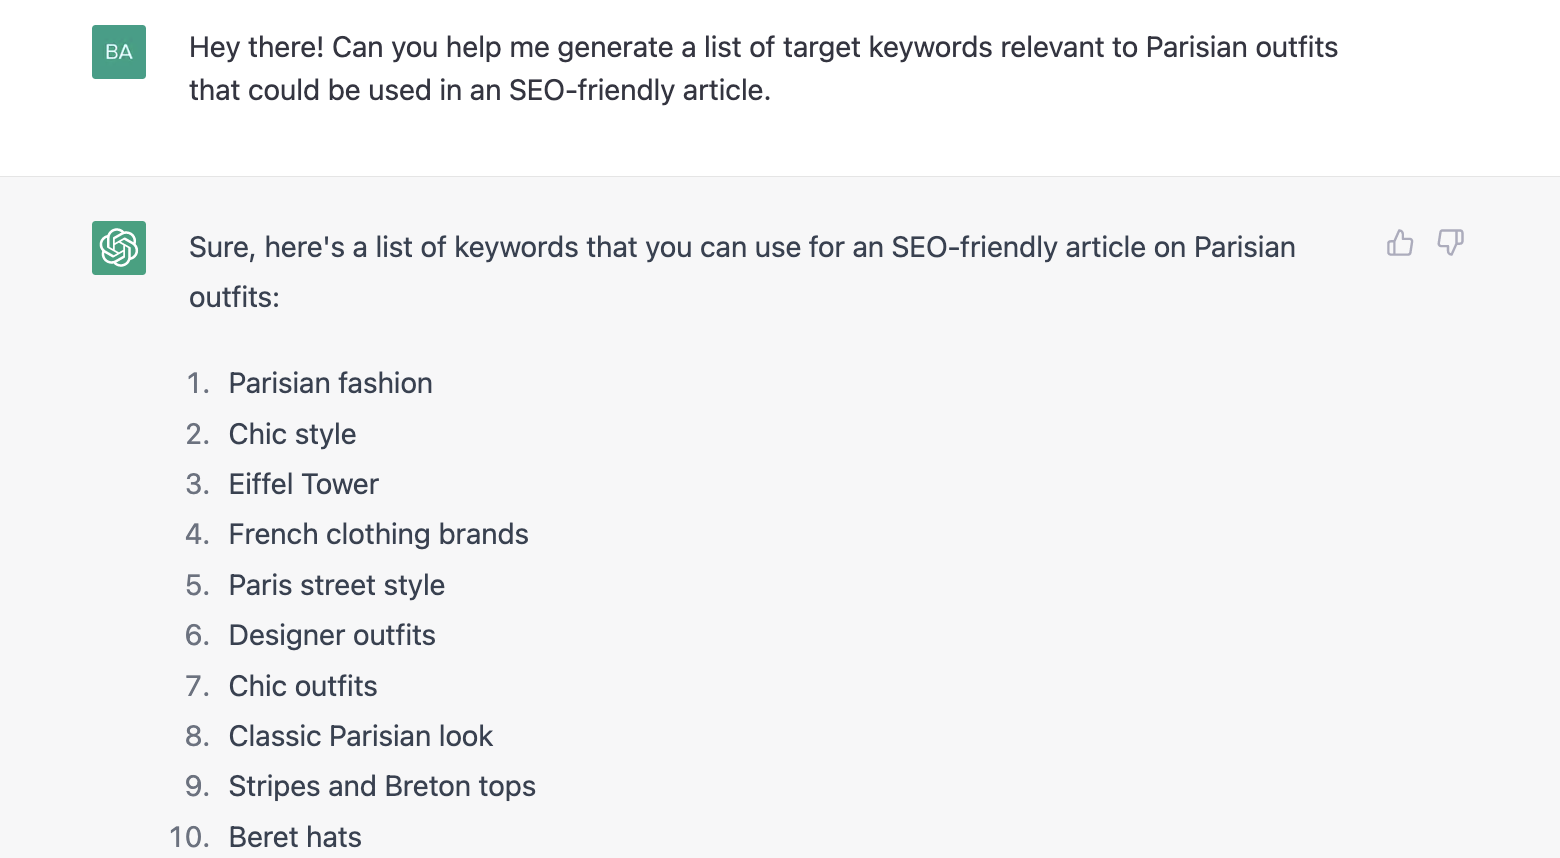 ChatGPT prompt about generating a list of target keywords relevant to parisian outfits